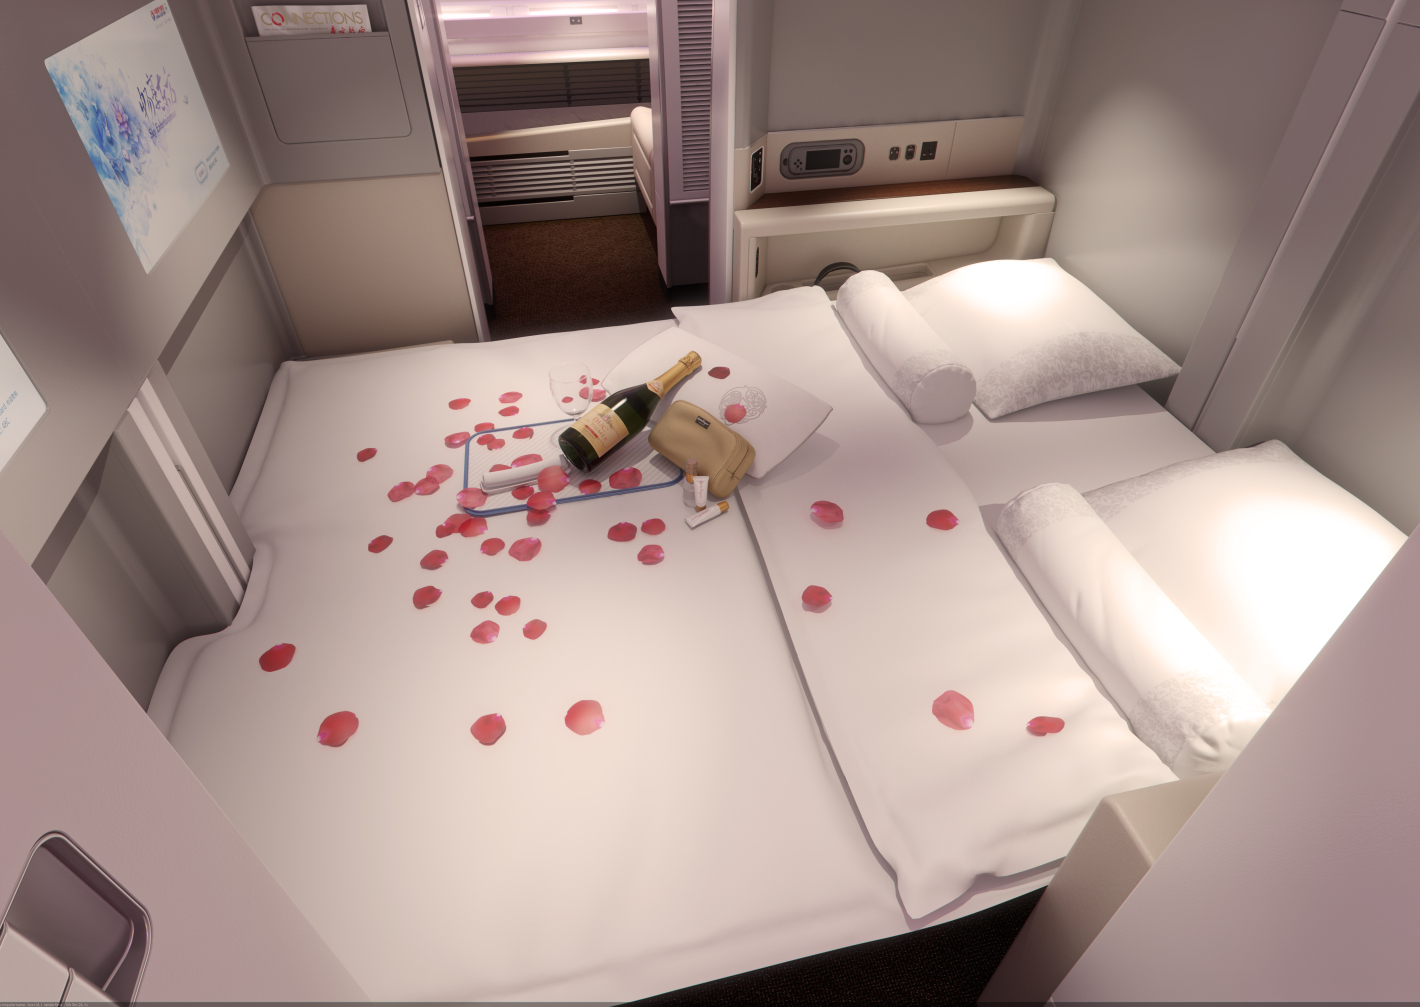 a bed with a bottle and rose petals on it